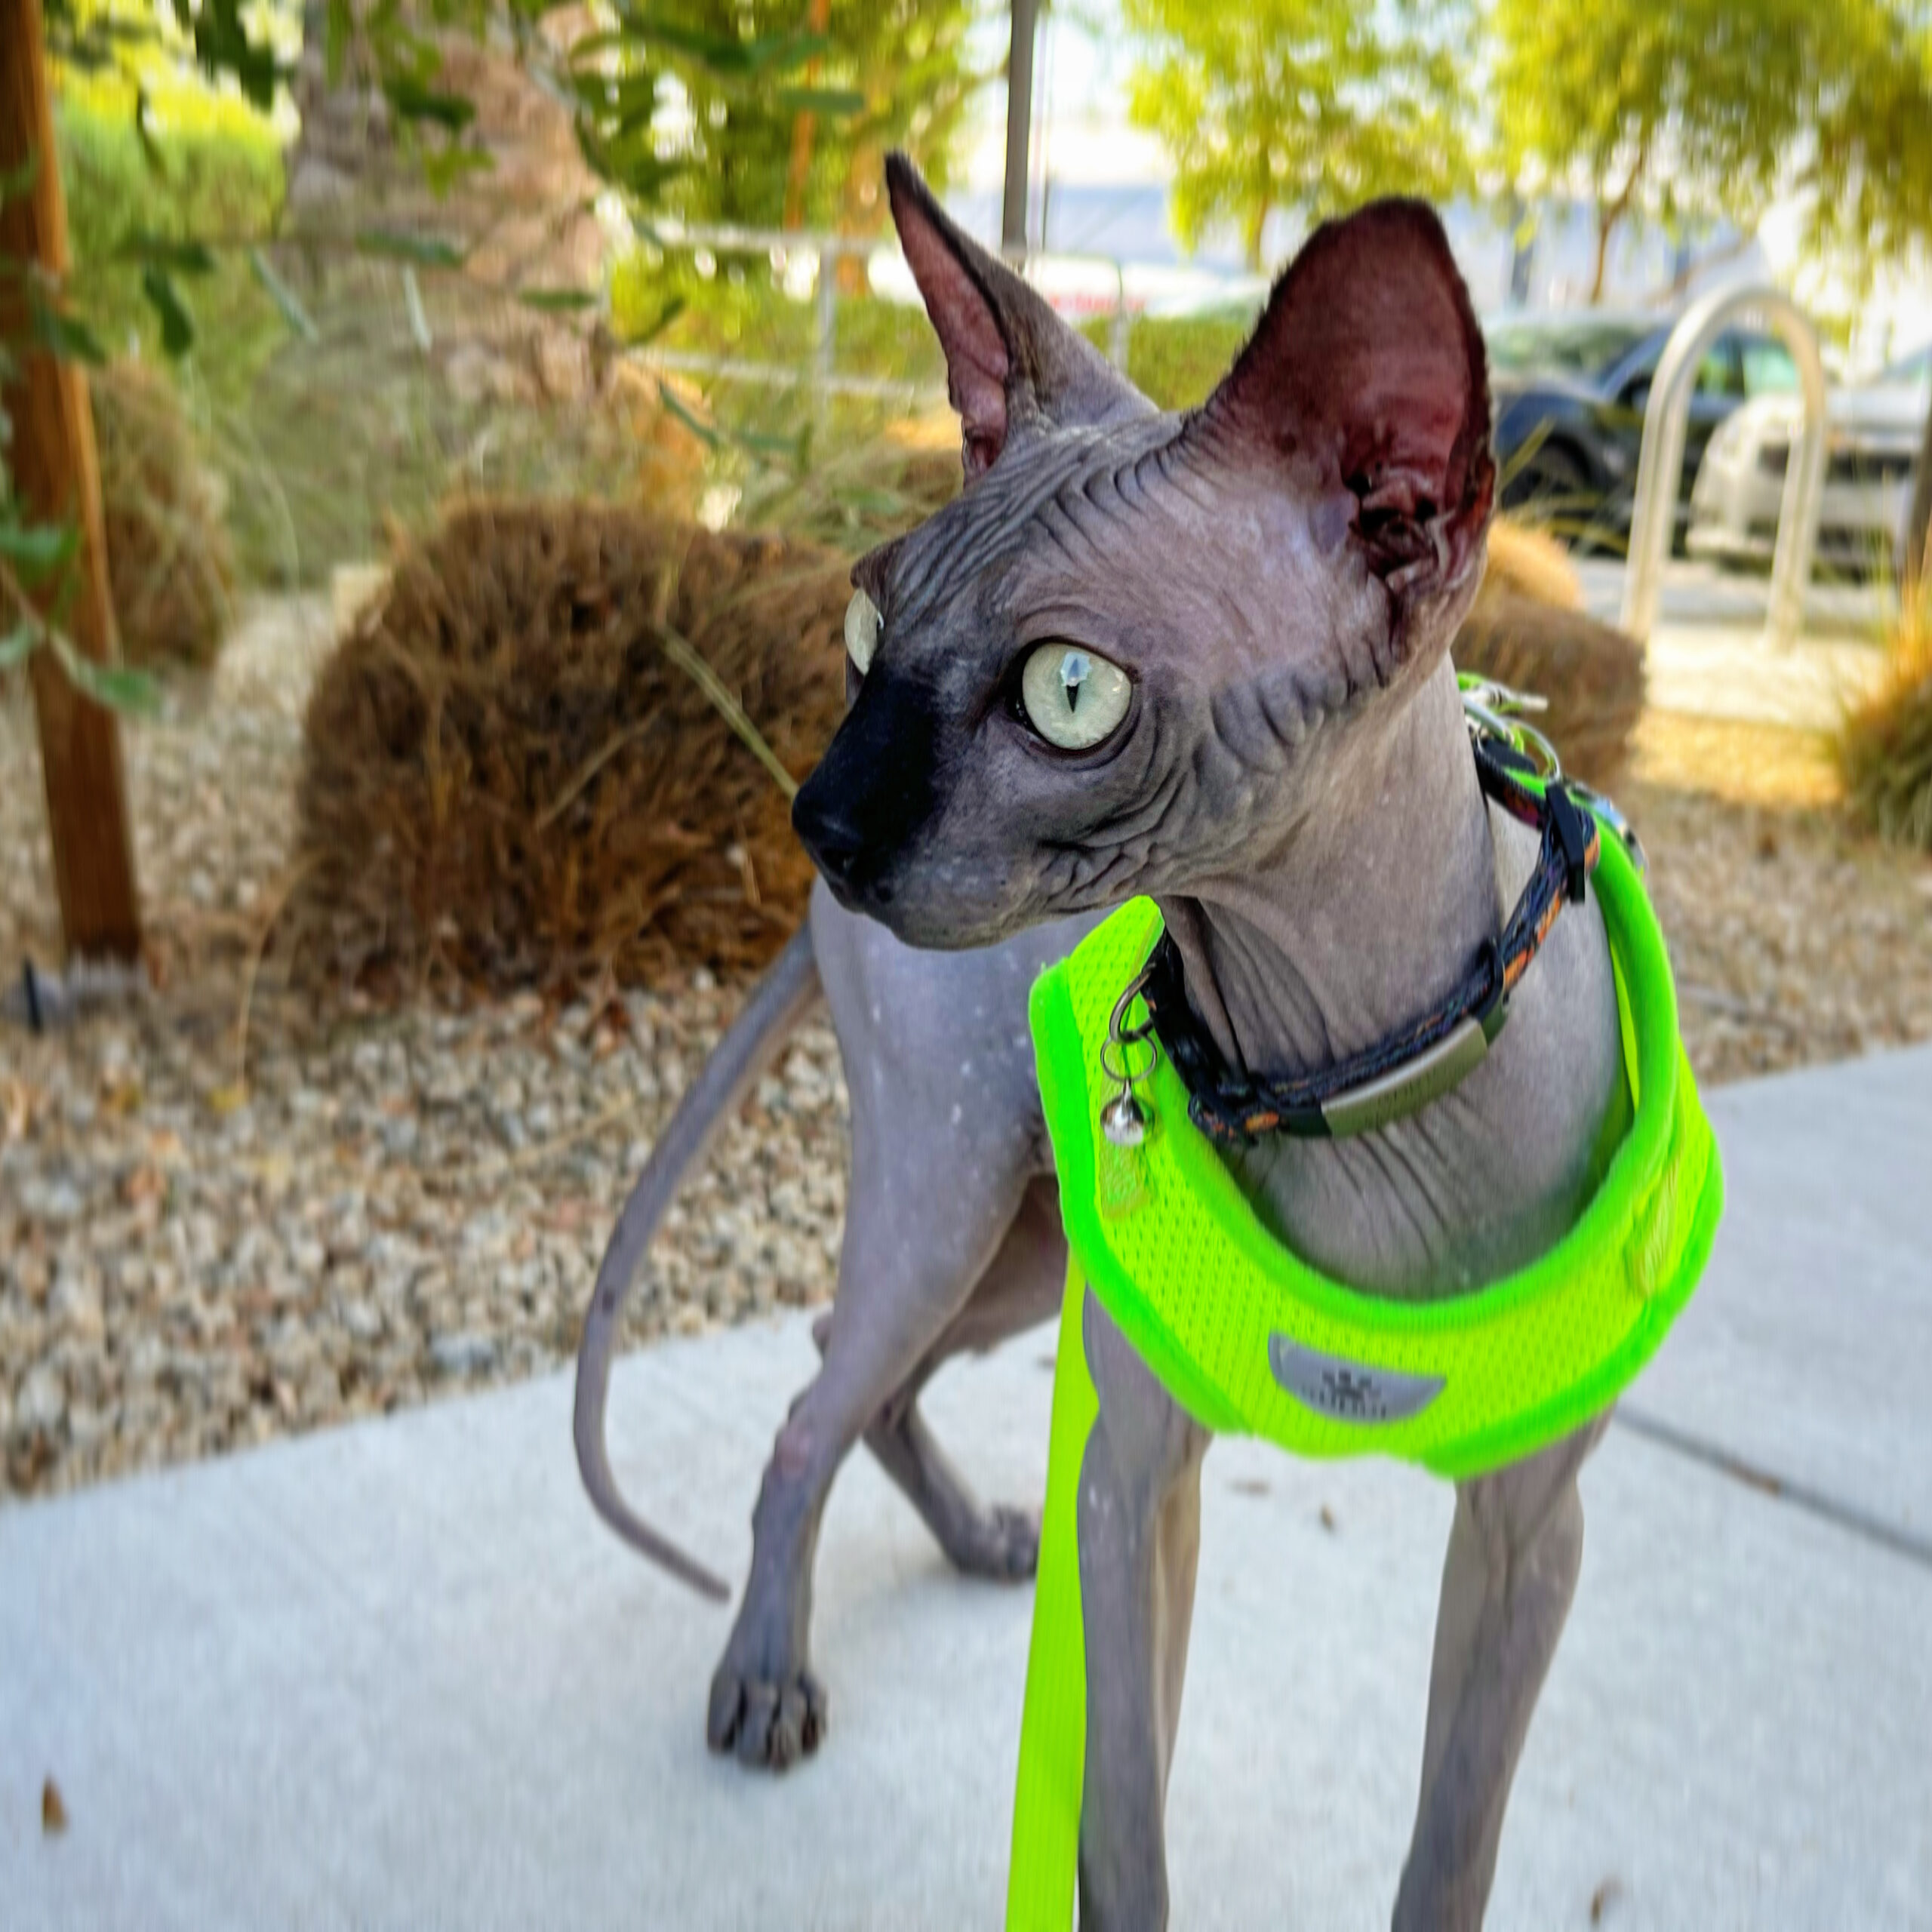 Product Review: Supet Cat Harness and Leash Set